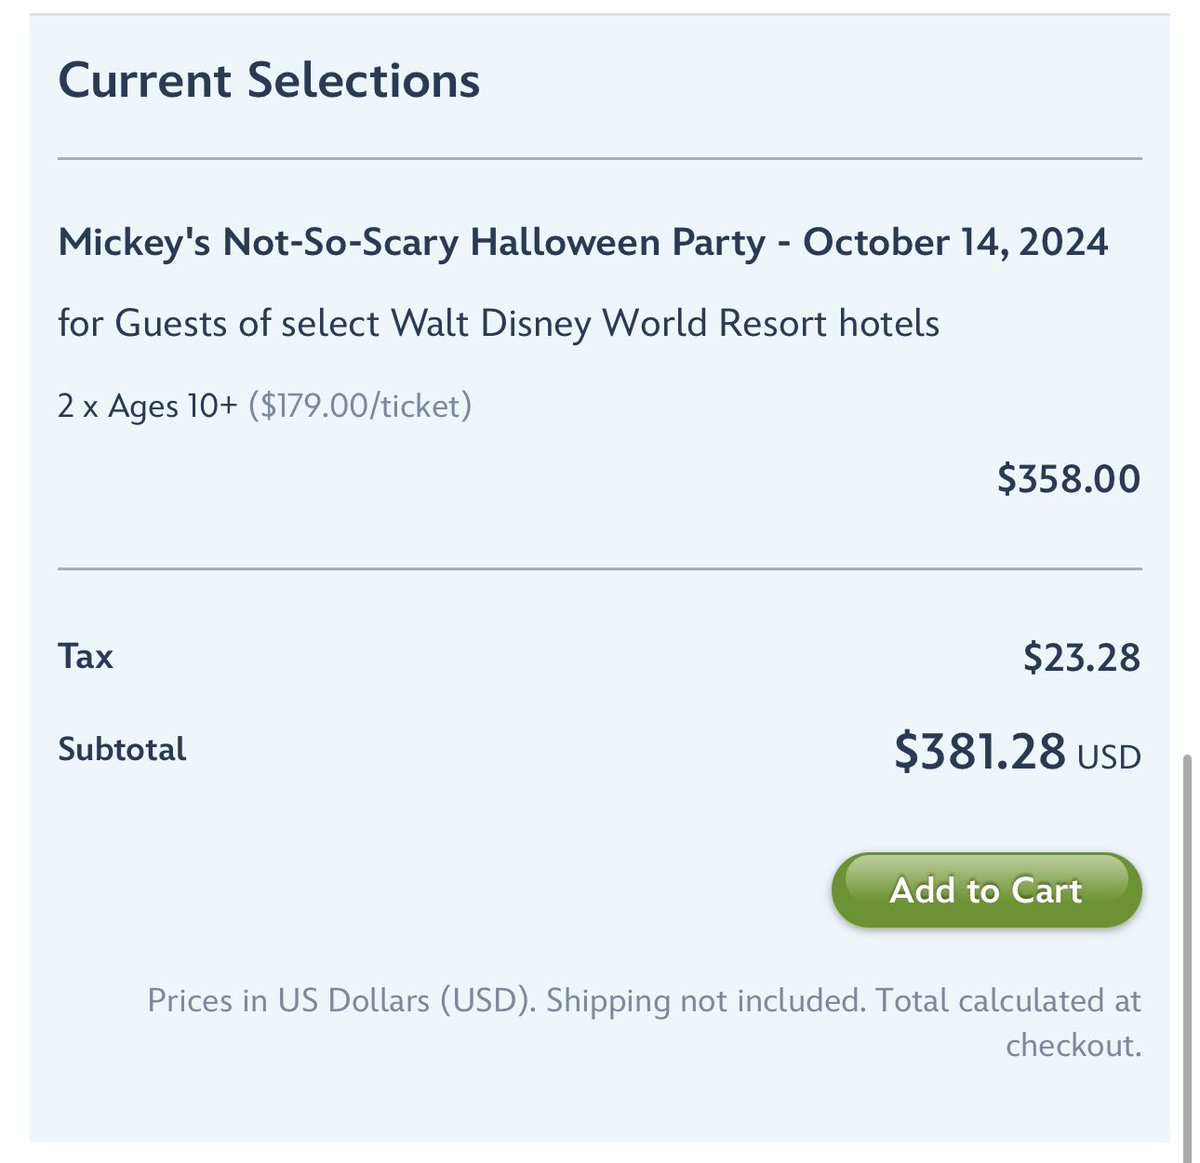 Price for two tickets to MNSSHP during our vacation. Worth it or NOT?